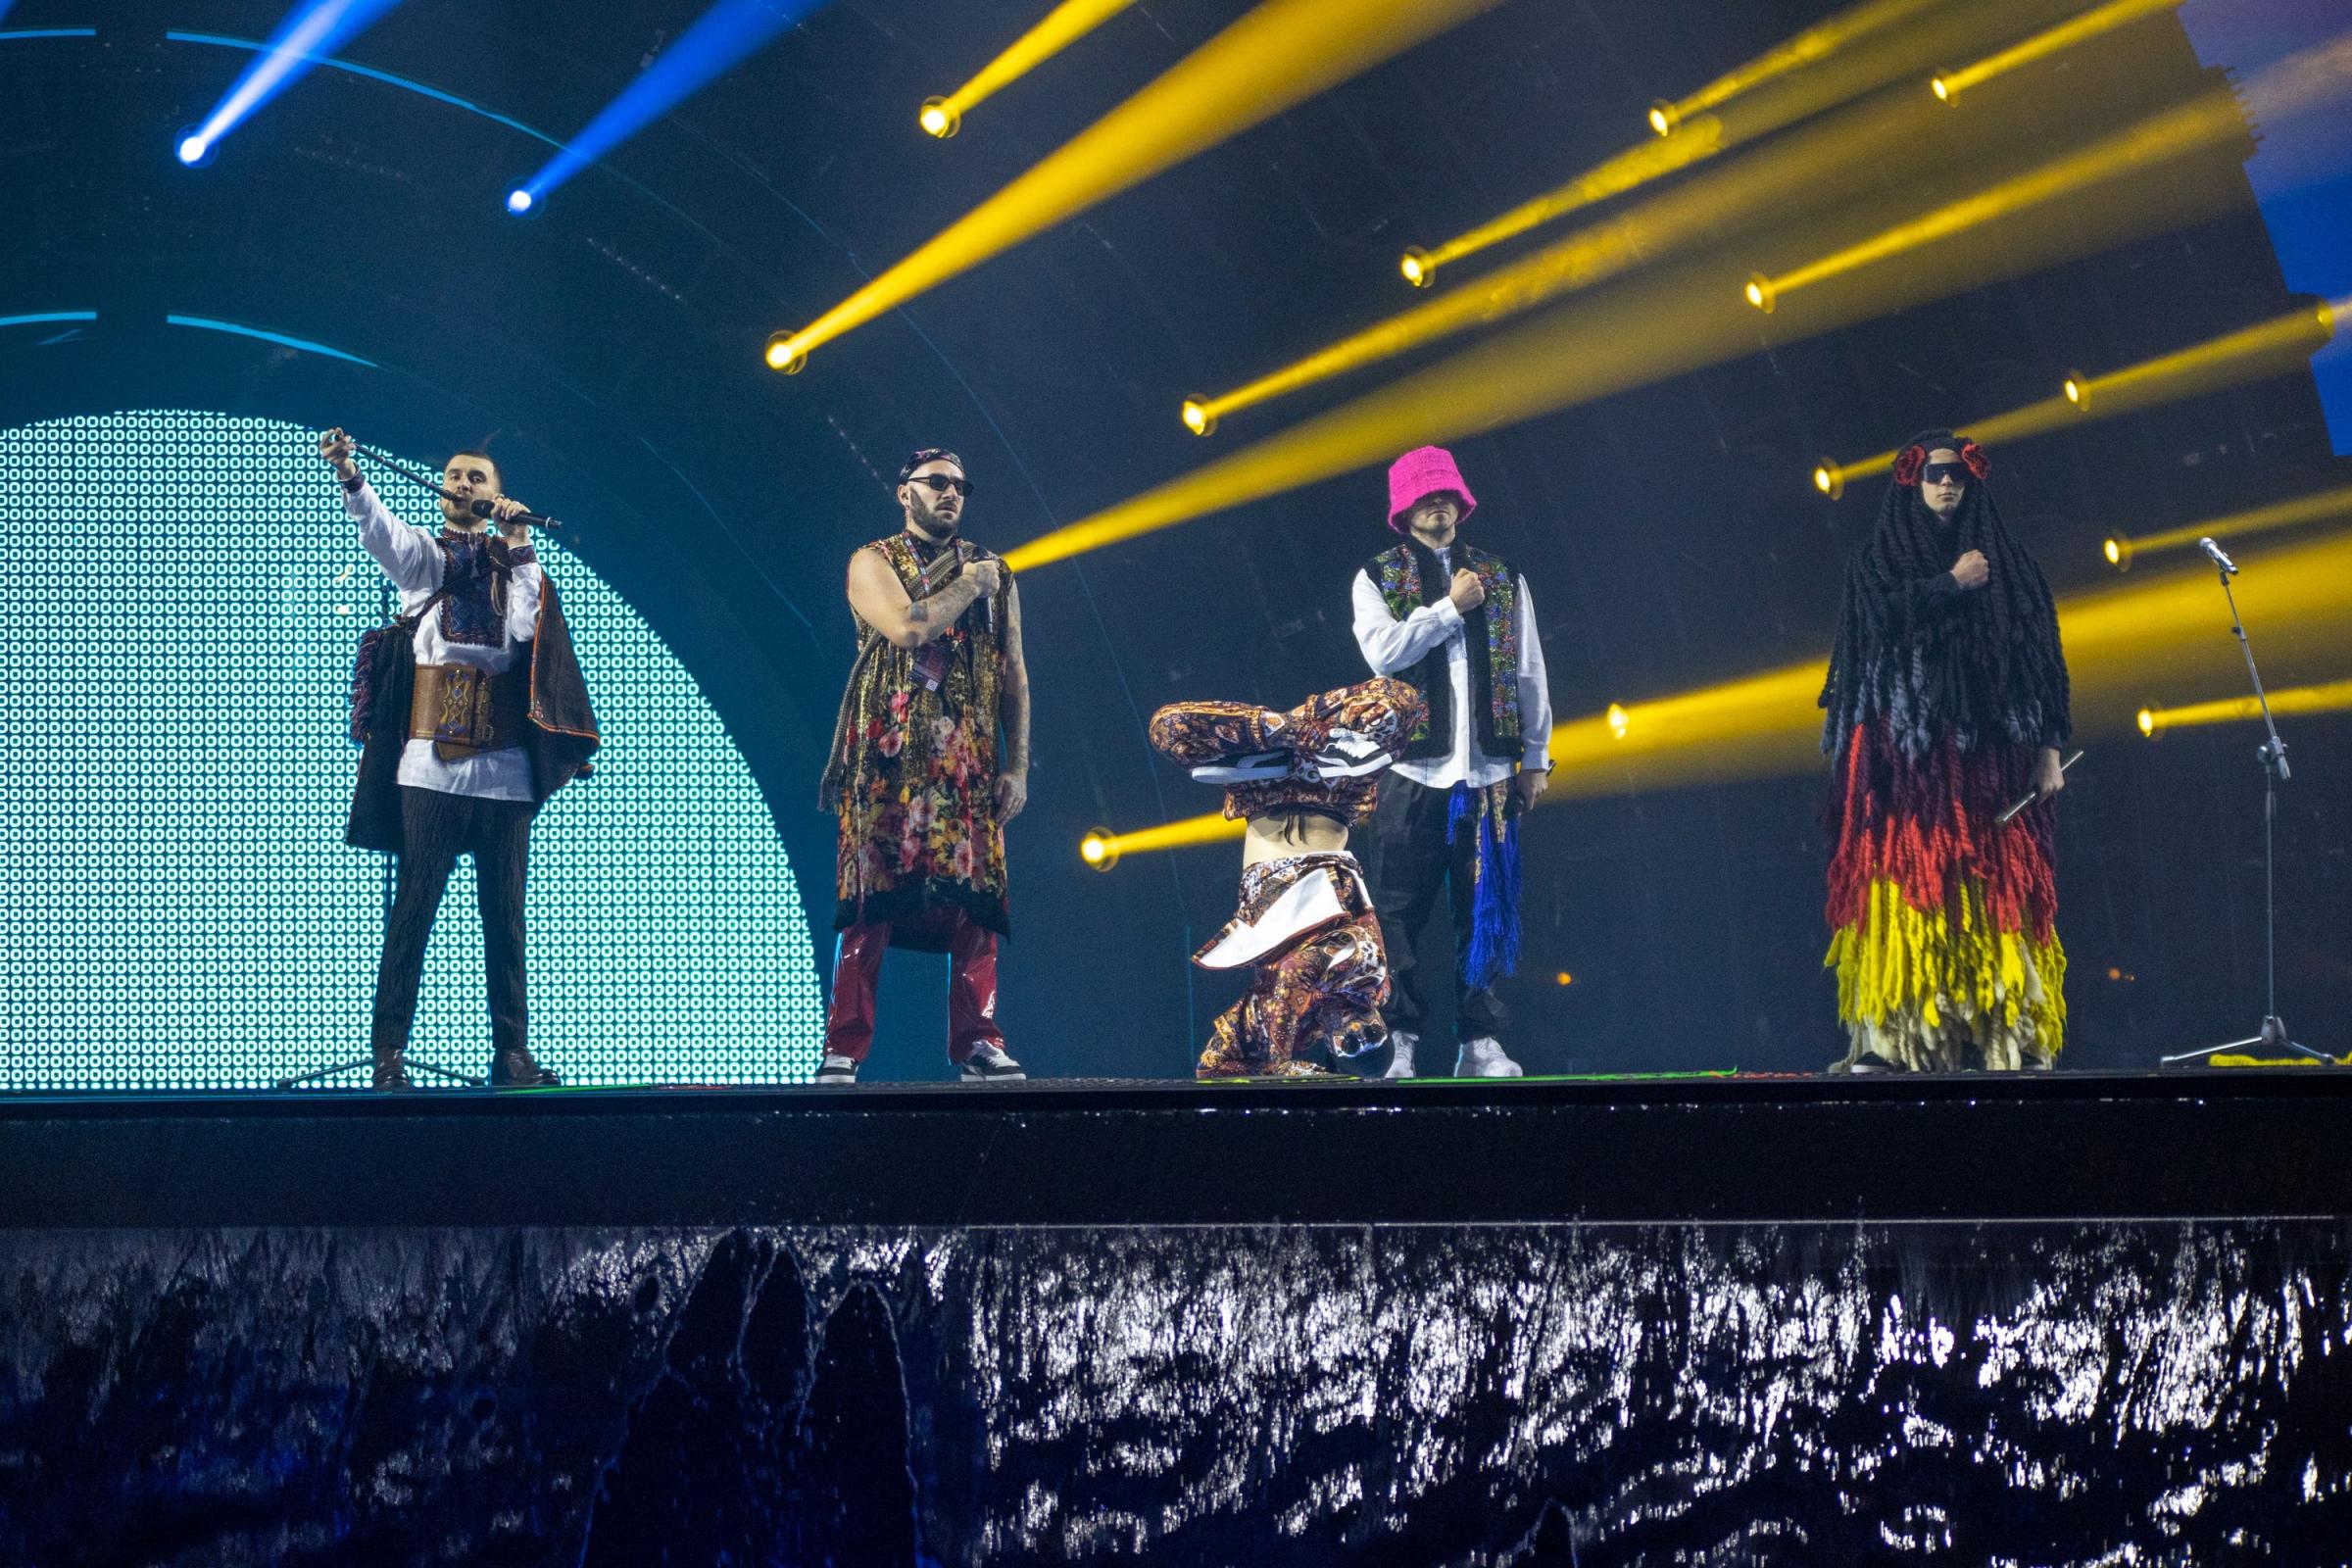 Eurovision Song Contest 2022: Who is Ukraine’s entry Kalush Orchestra?